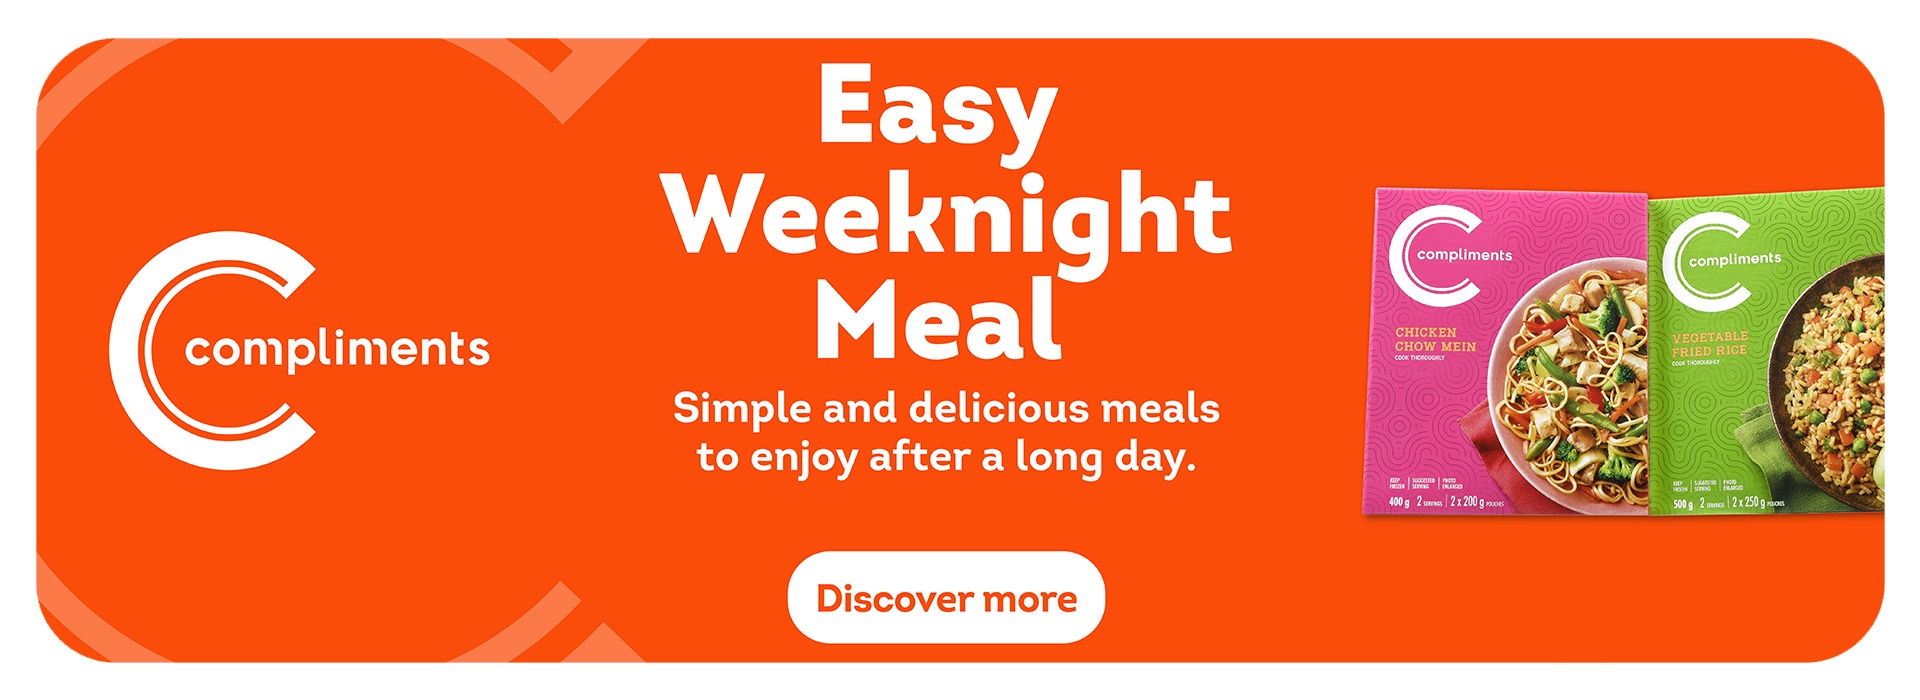 Compliments products on an Orange background. Headline:Easy Weeknight Meal, Copy: Simple and delicious meals to enjoy after a long day. Products featured are Compliments Chicken Chow Mein & Compliments Vegetable Fried Rice.